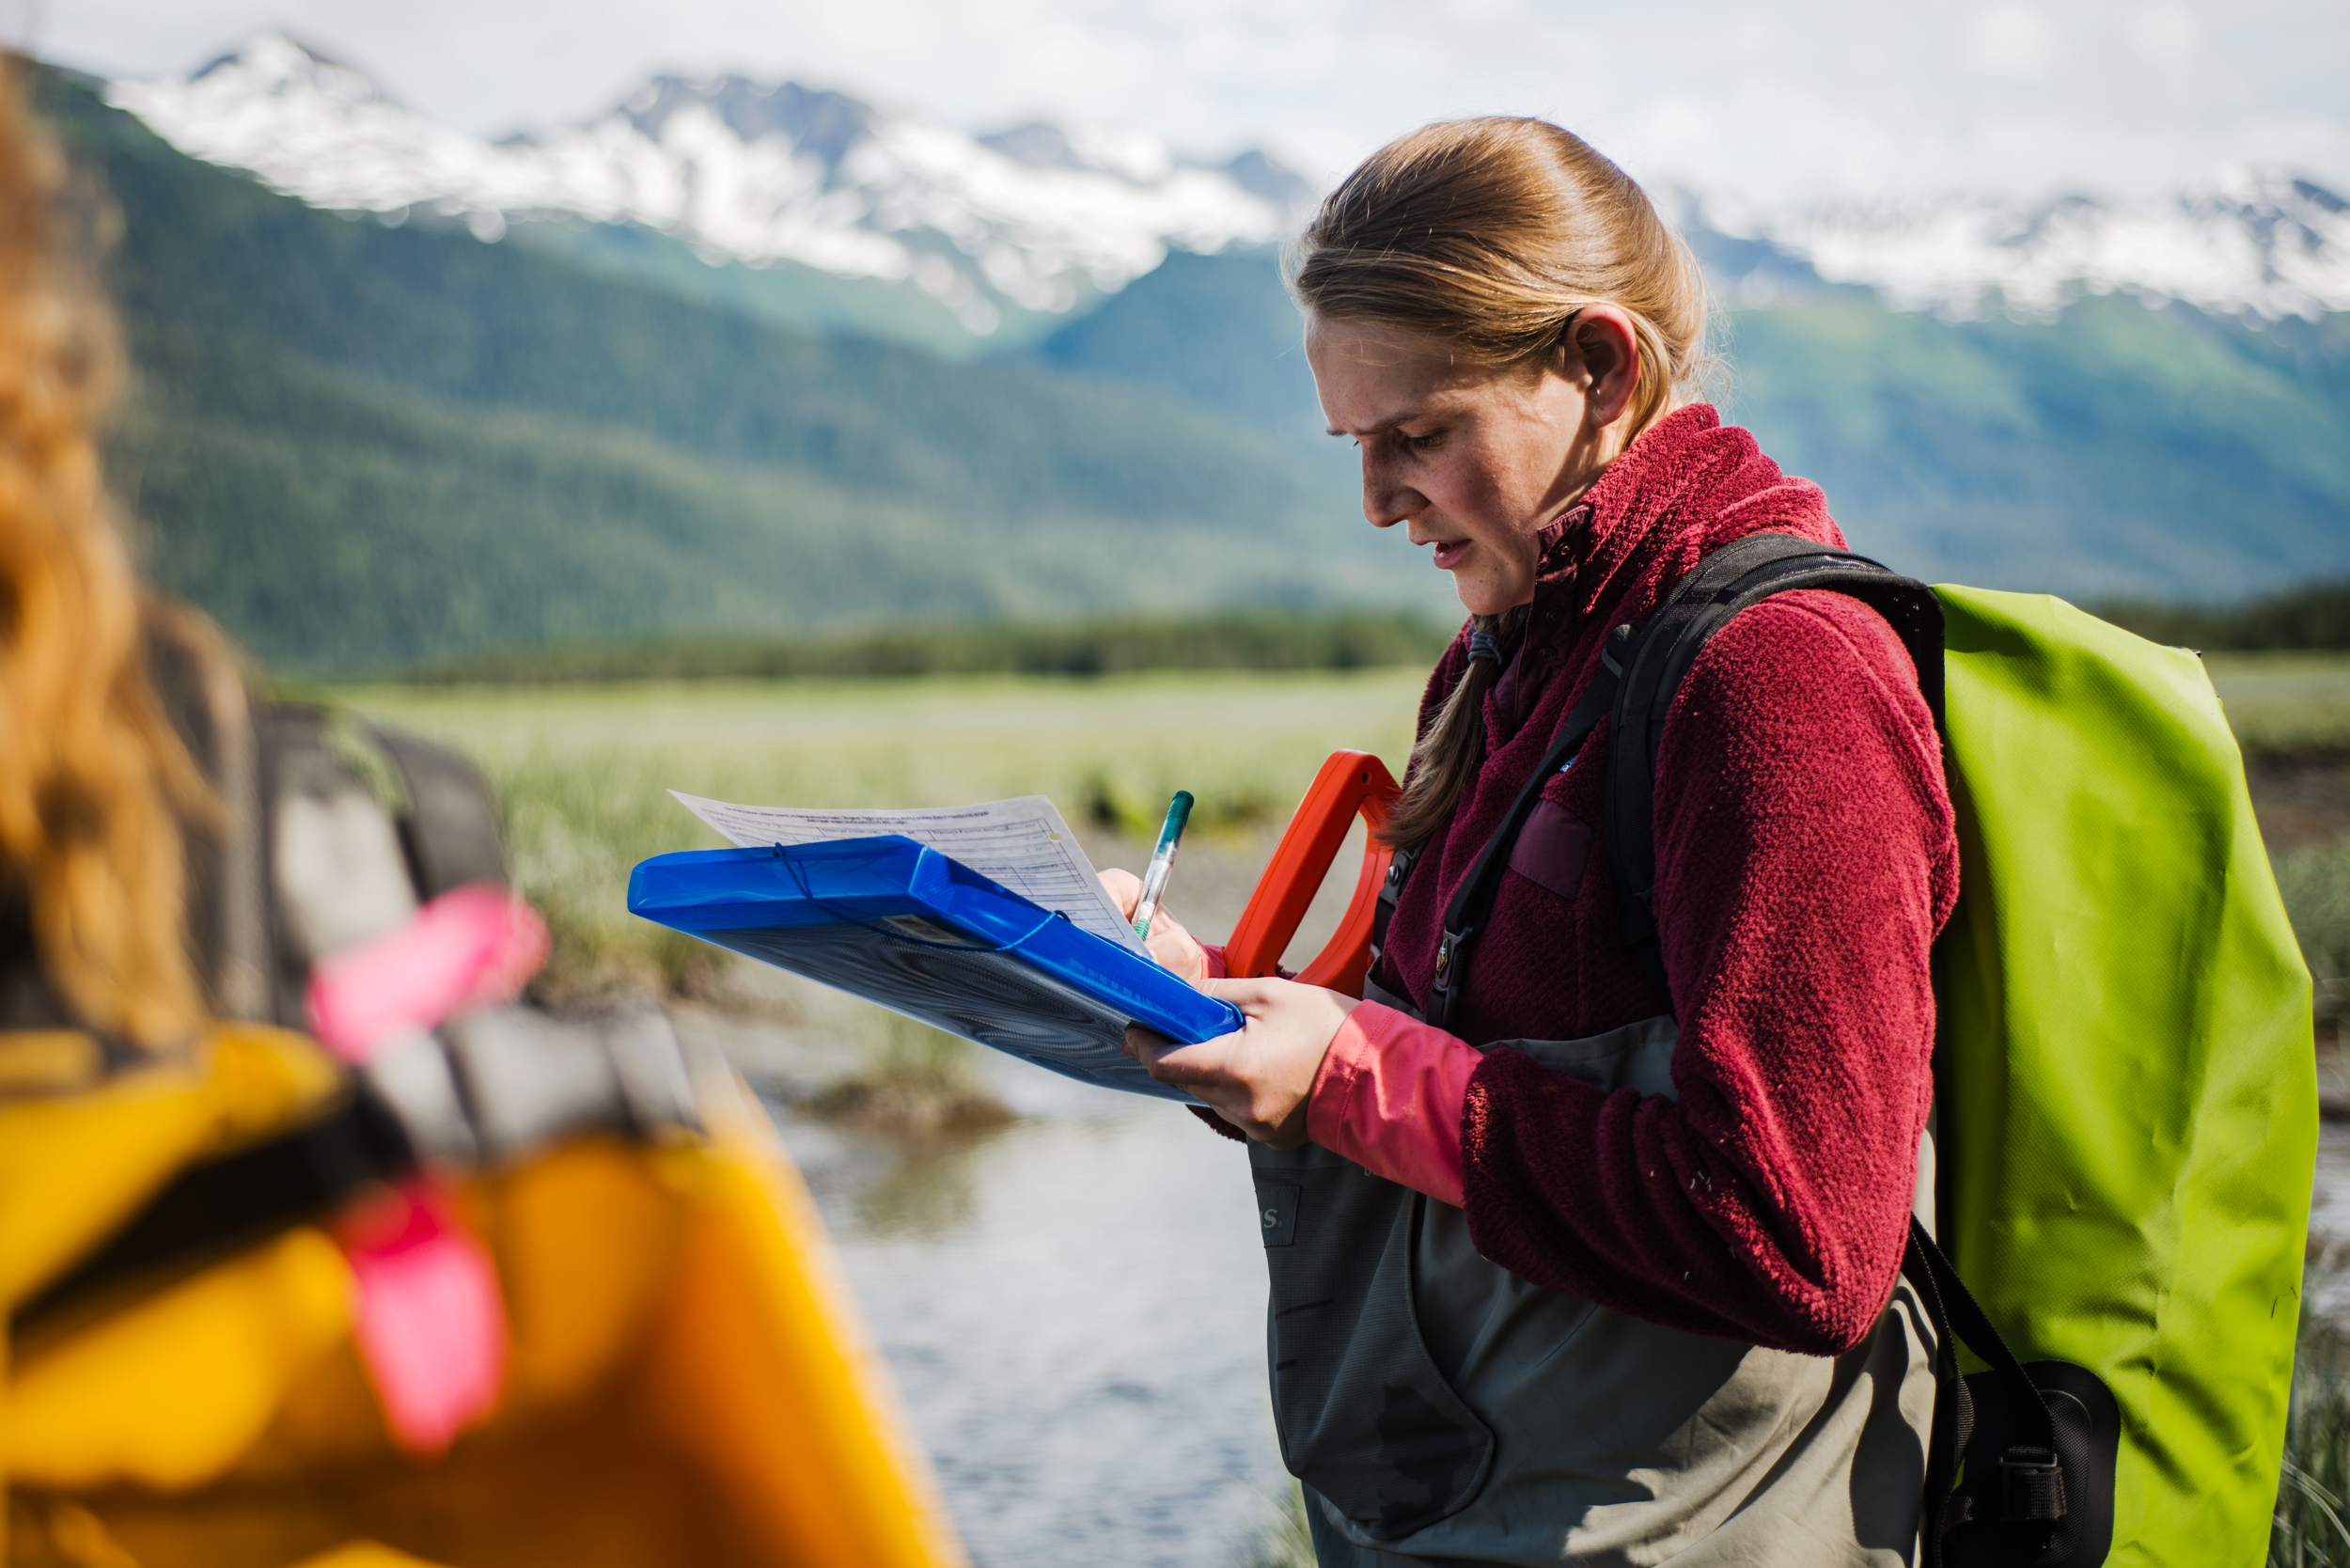  Carmen Harjoe is an graduate student pursuing her Ph.D. in integrative biology at Oregon State University. Her research focuses on understanding how various pathogens effect amphibians and their ecosystems. In particular, she focuses on the Boreal t